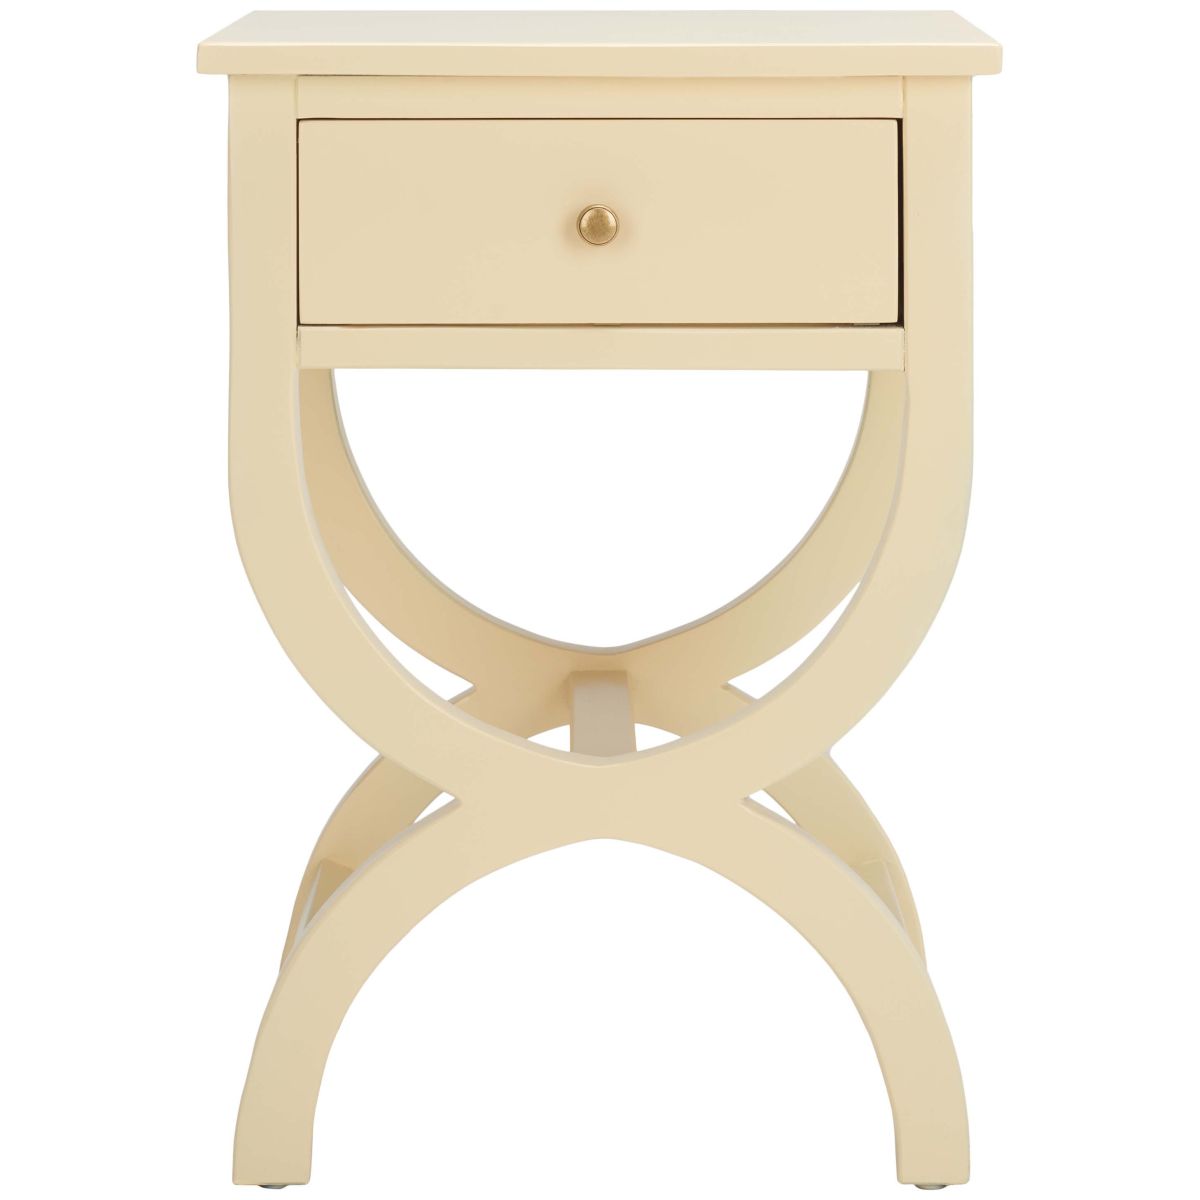 Safavieh Maxine Accent Table With Storage Drawer , AMH6608